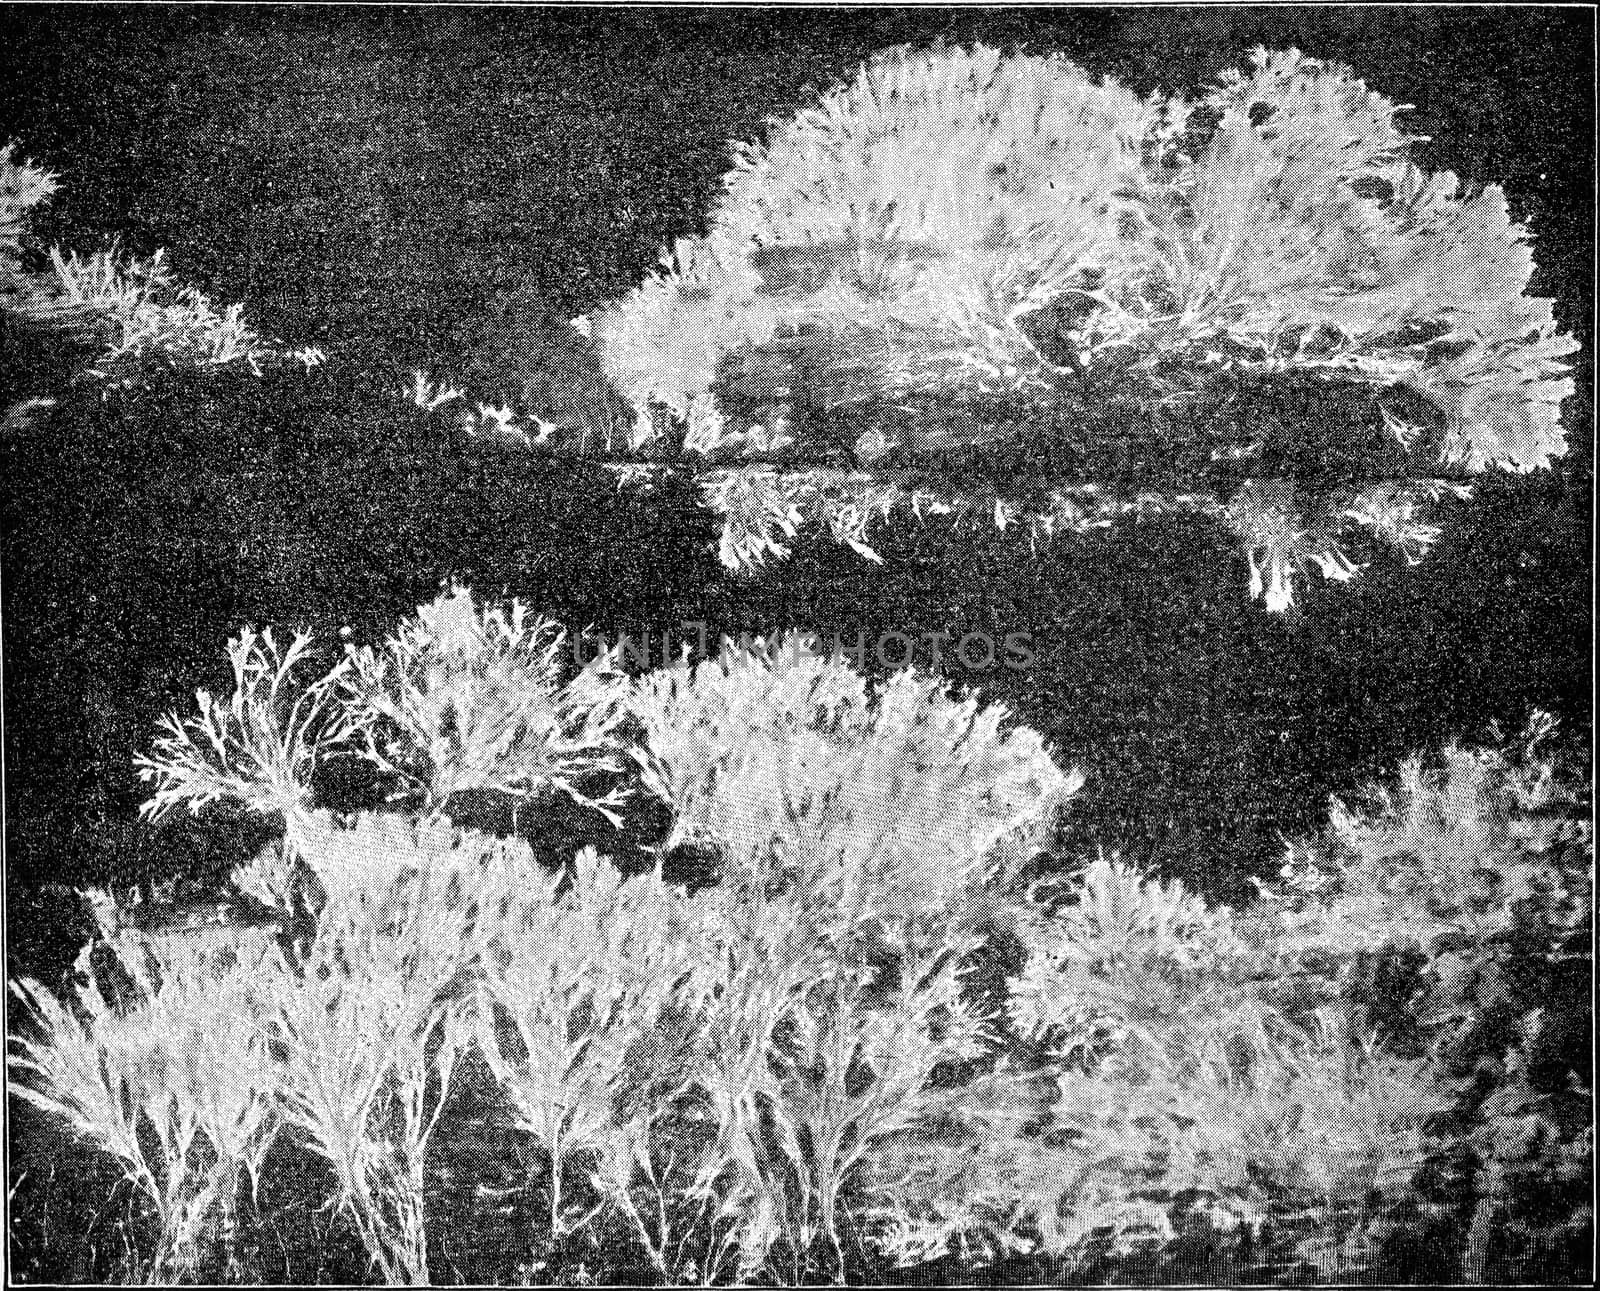 Merulius mycelium spreads like a fan, the attack has wood surface, vintage engraved illustration.
